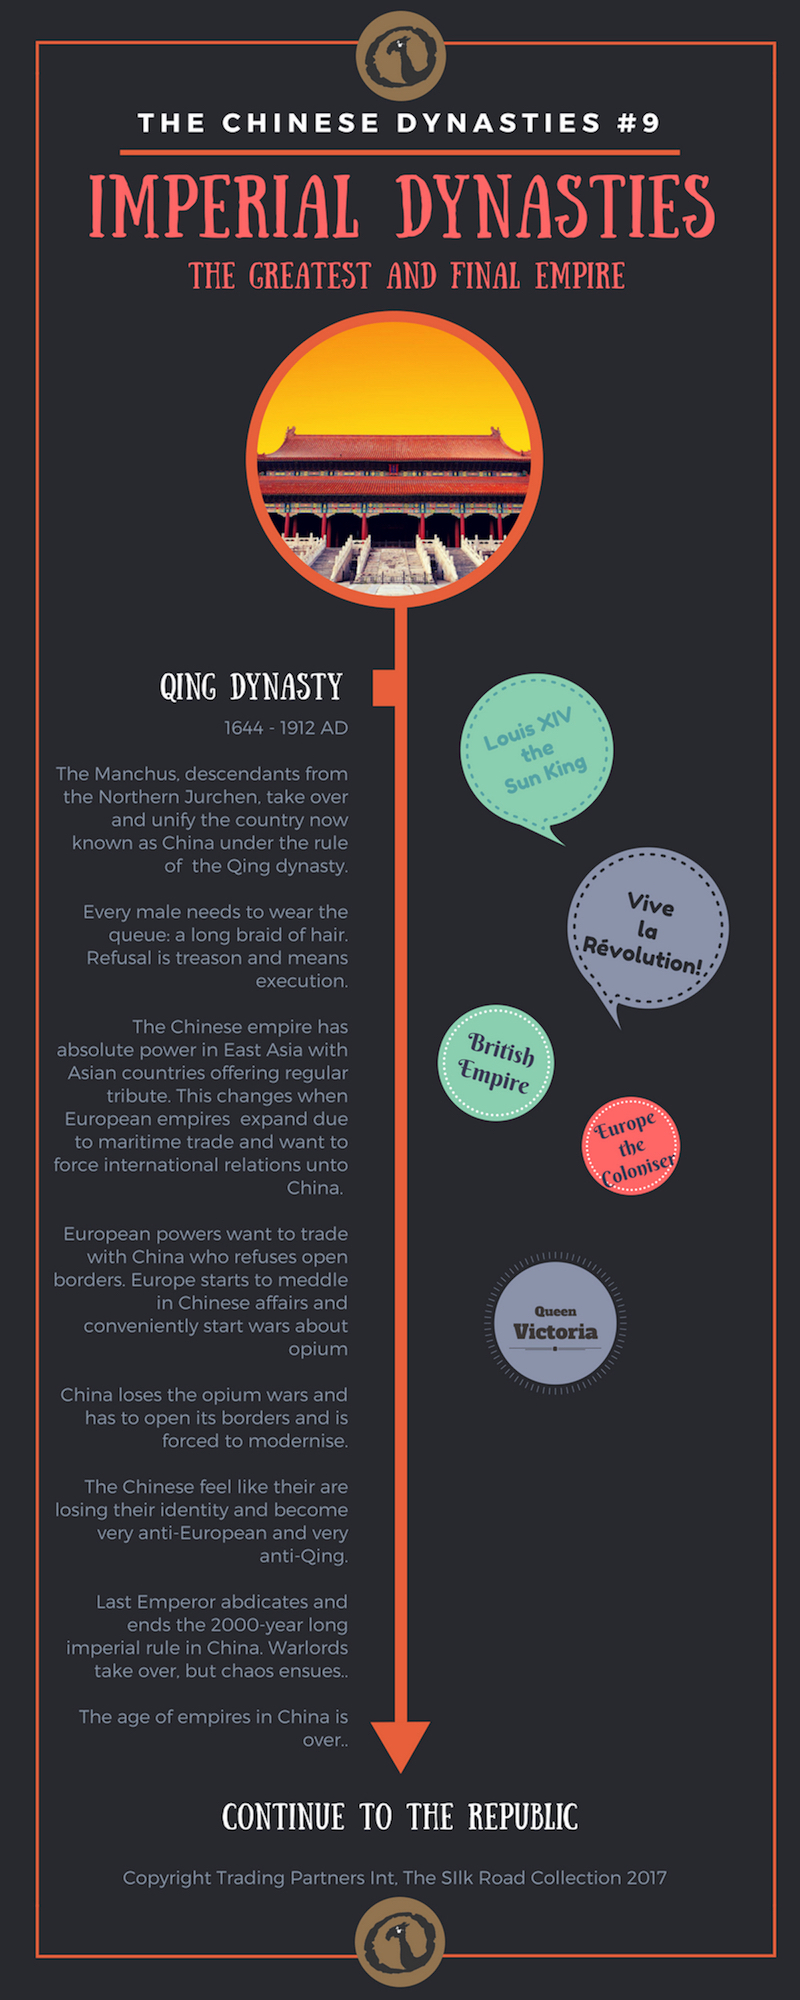 Timeline image of The Chinese Dynasties: Imperial Dynasties - The greatest and final empire